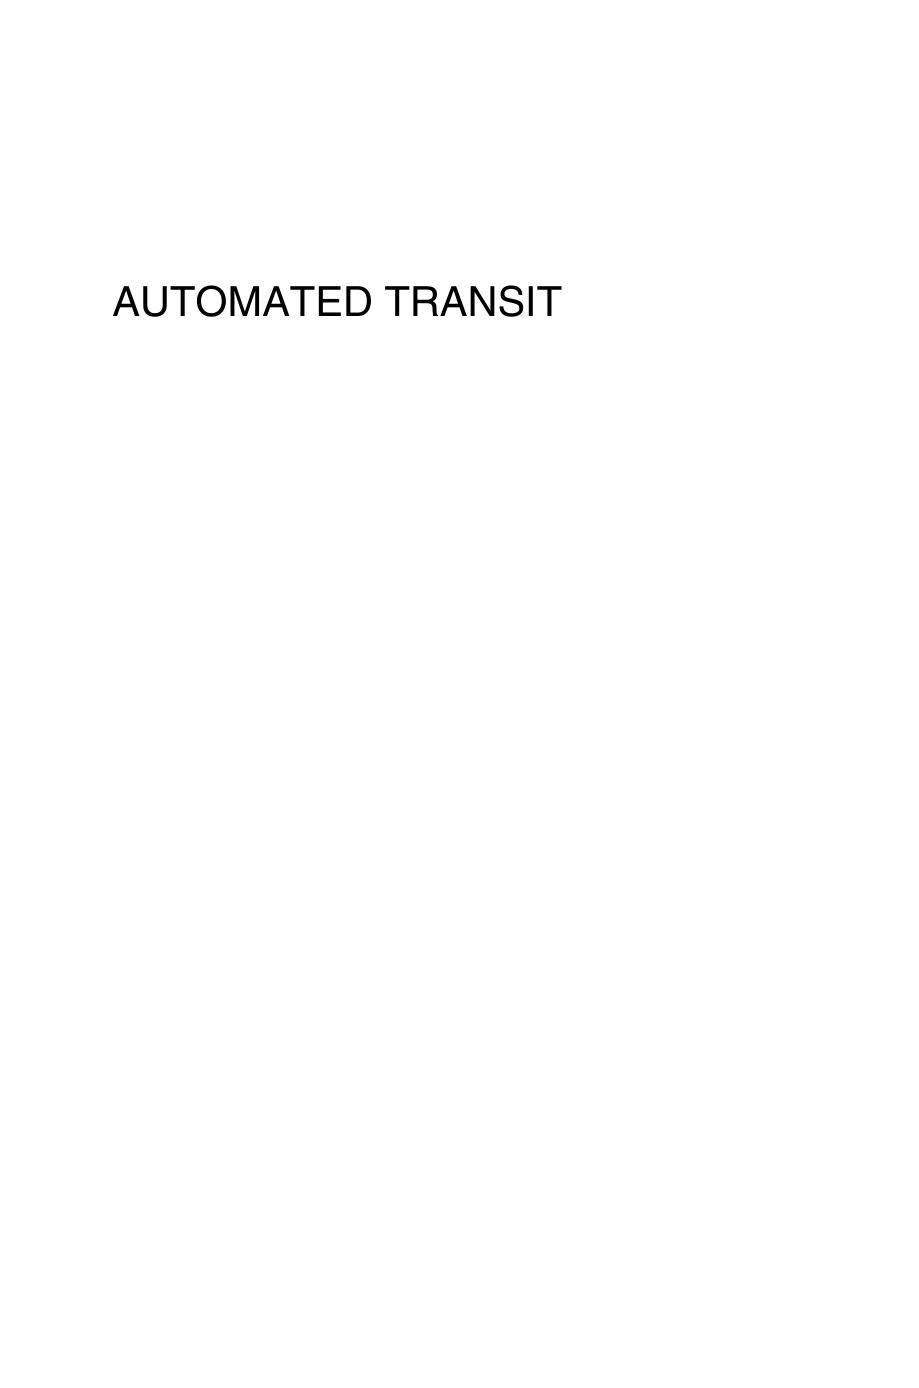 Automated Transit by Planning Operation & Applications (2017)